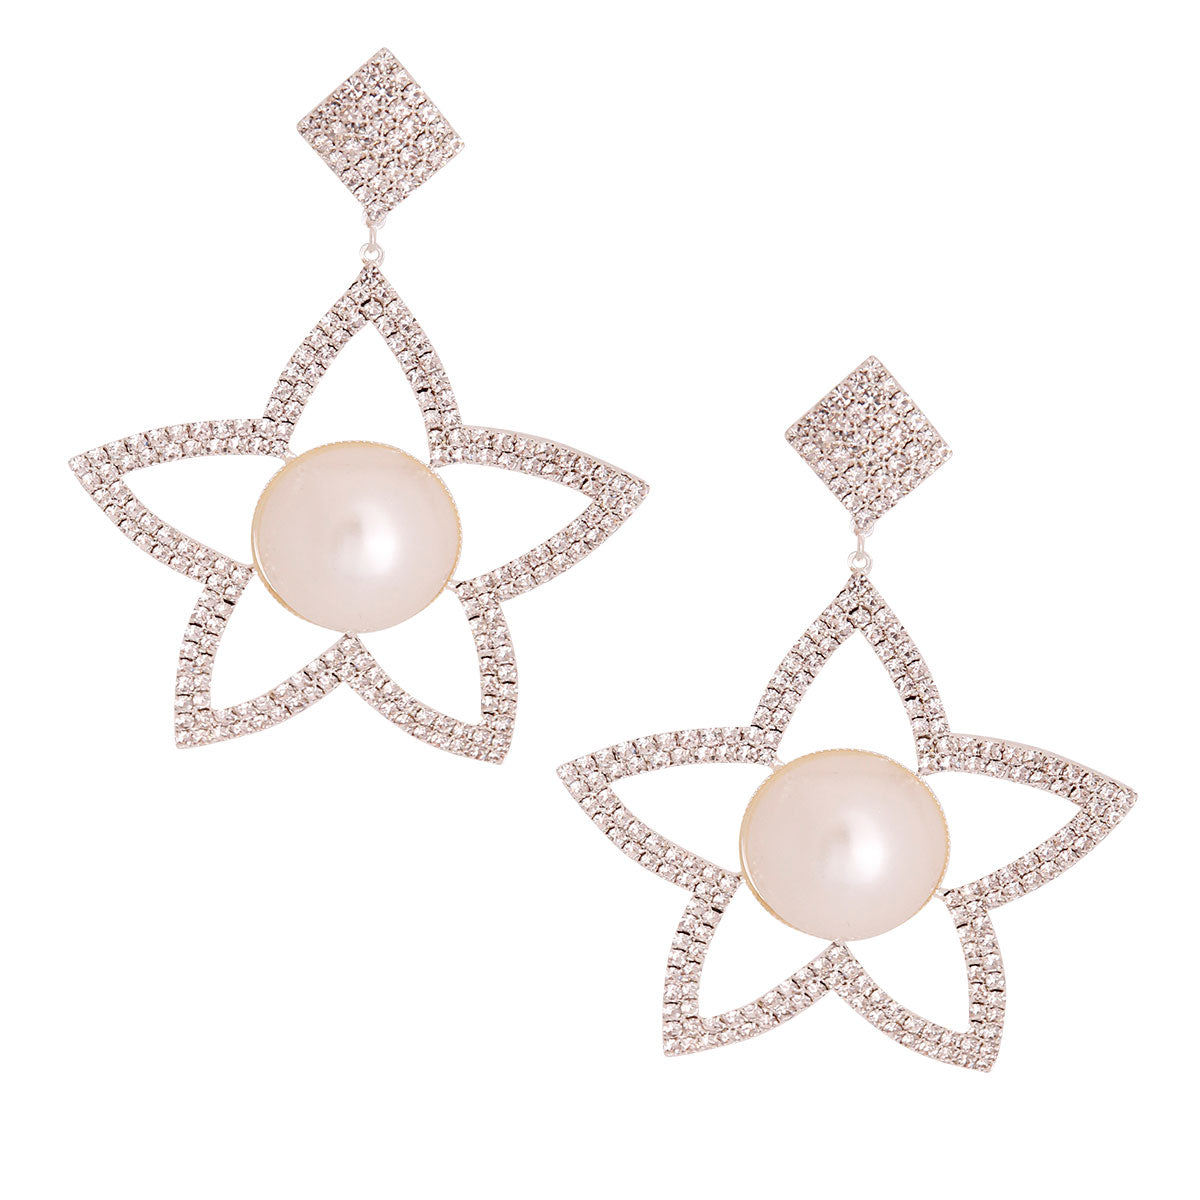 White Pearl and Stone Star Earrings